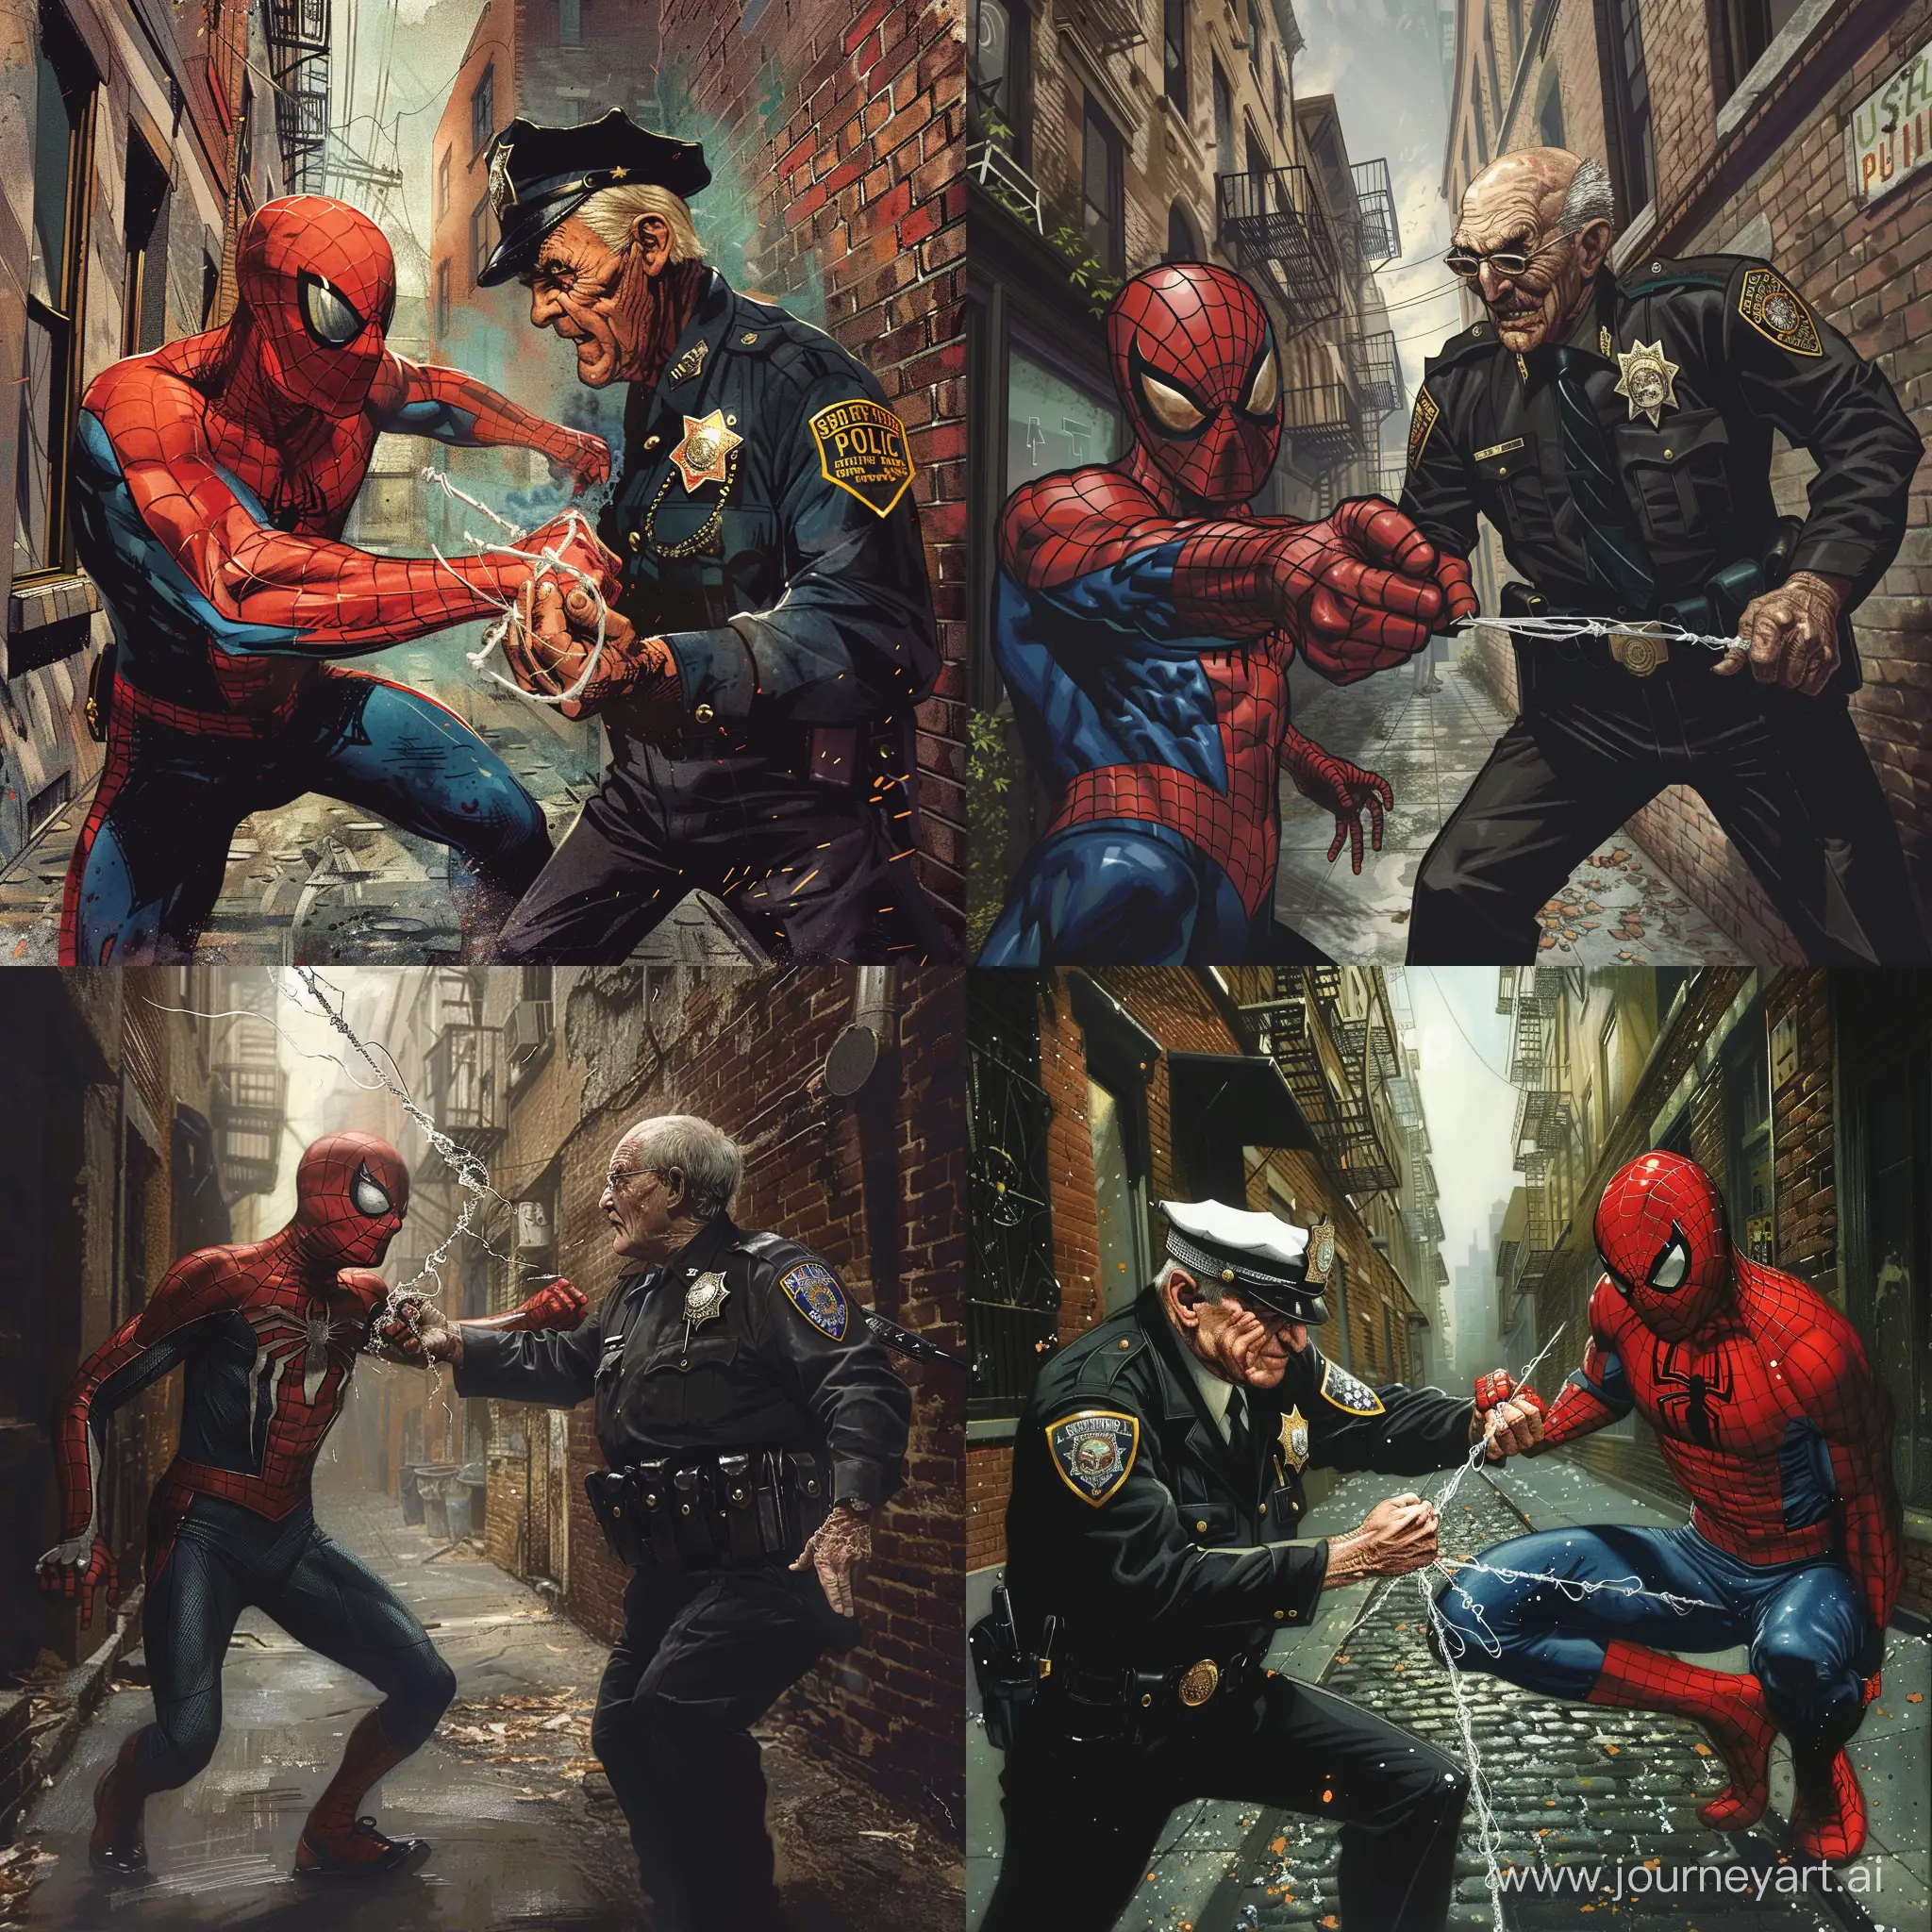 spiderman punched by an elderly policeman in an alley